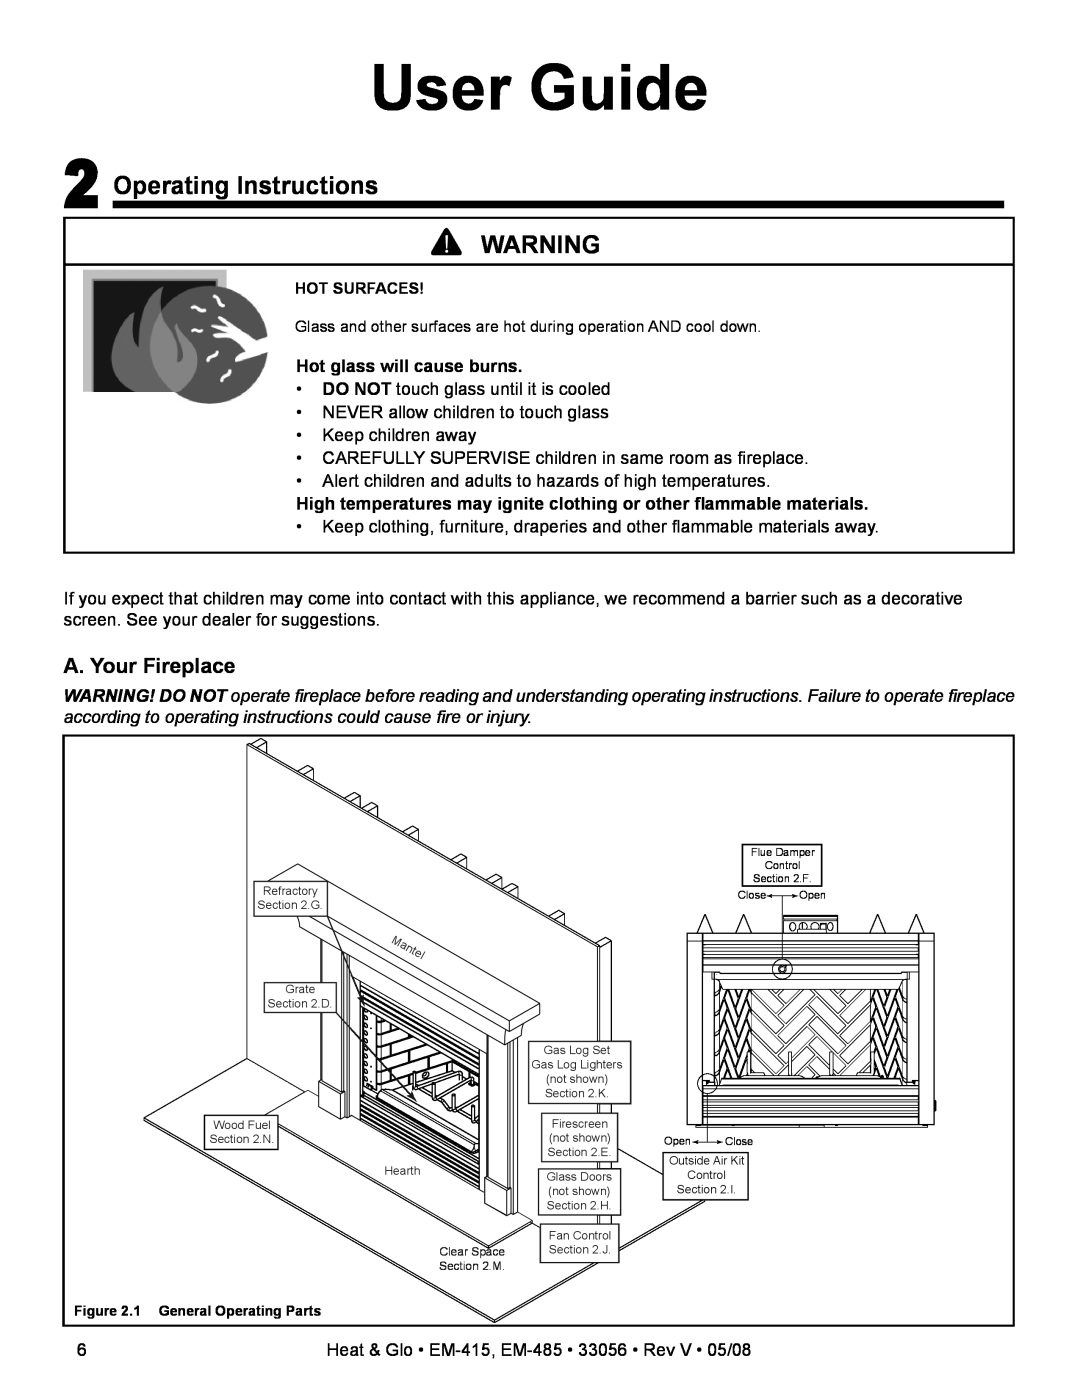 Heat & Glo LifeStyle EM-415H, EM-485TH User Guide, Operating Instructions, A. Your Fireplace, Hot glass will cause burns 